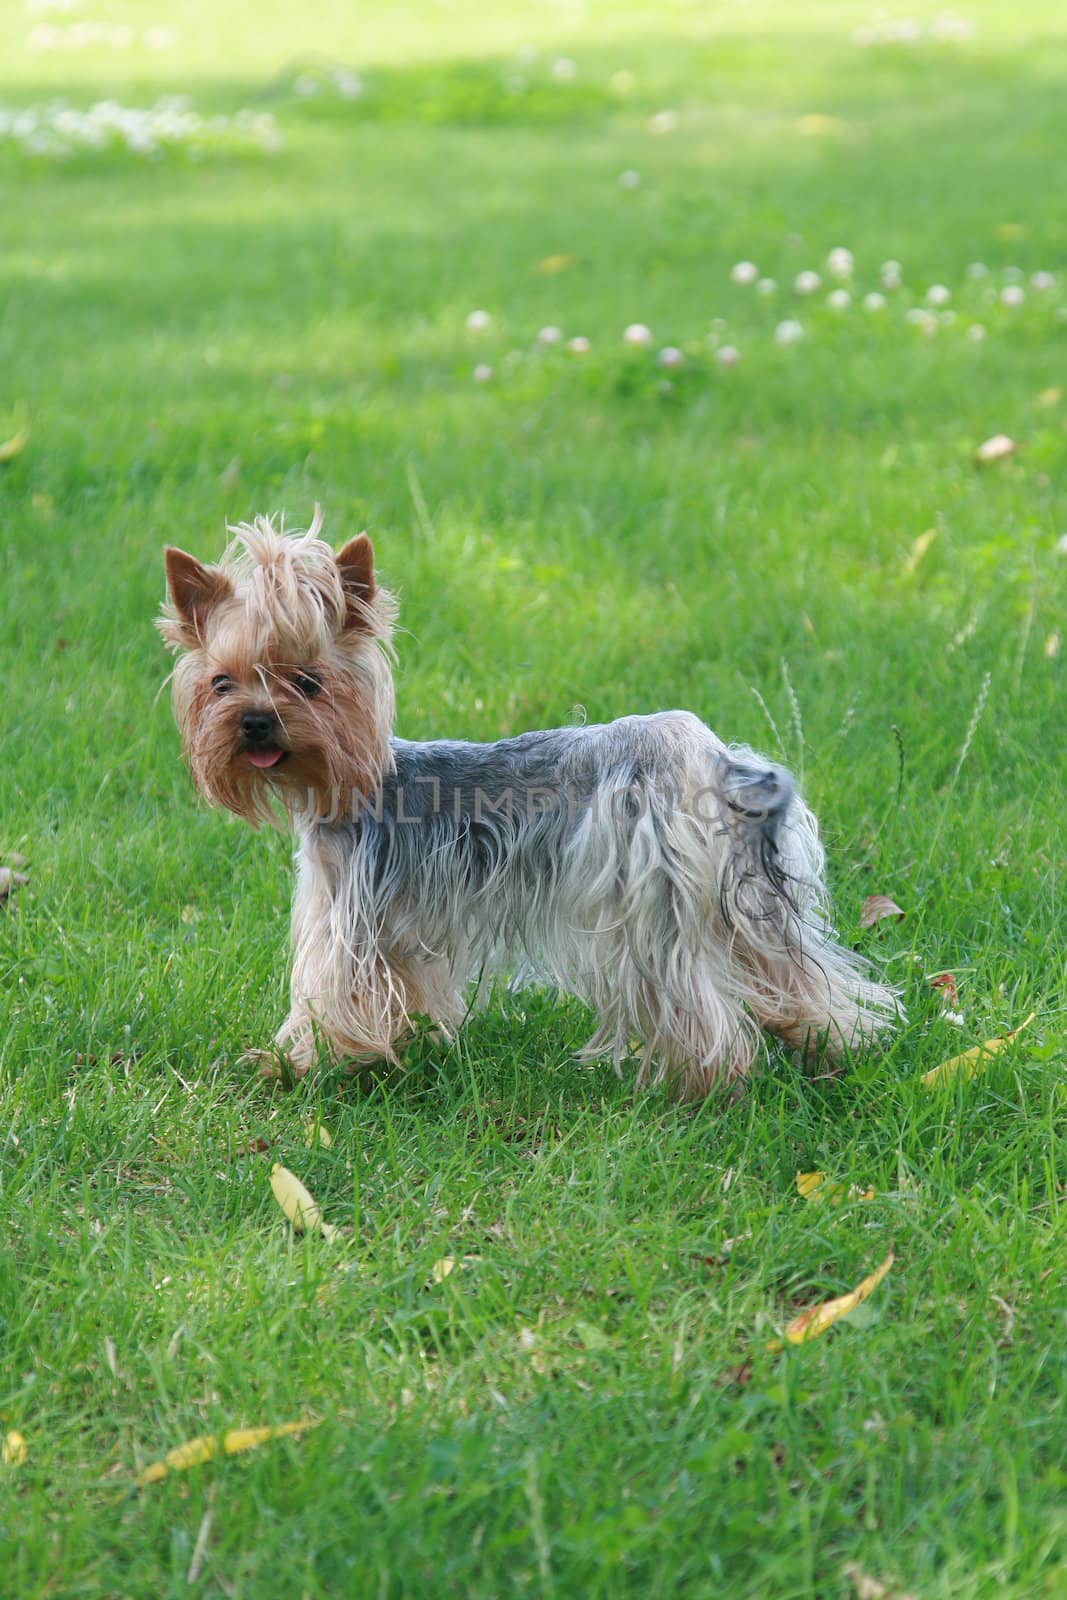 The small terrier costs on a green lawn